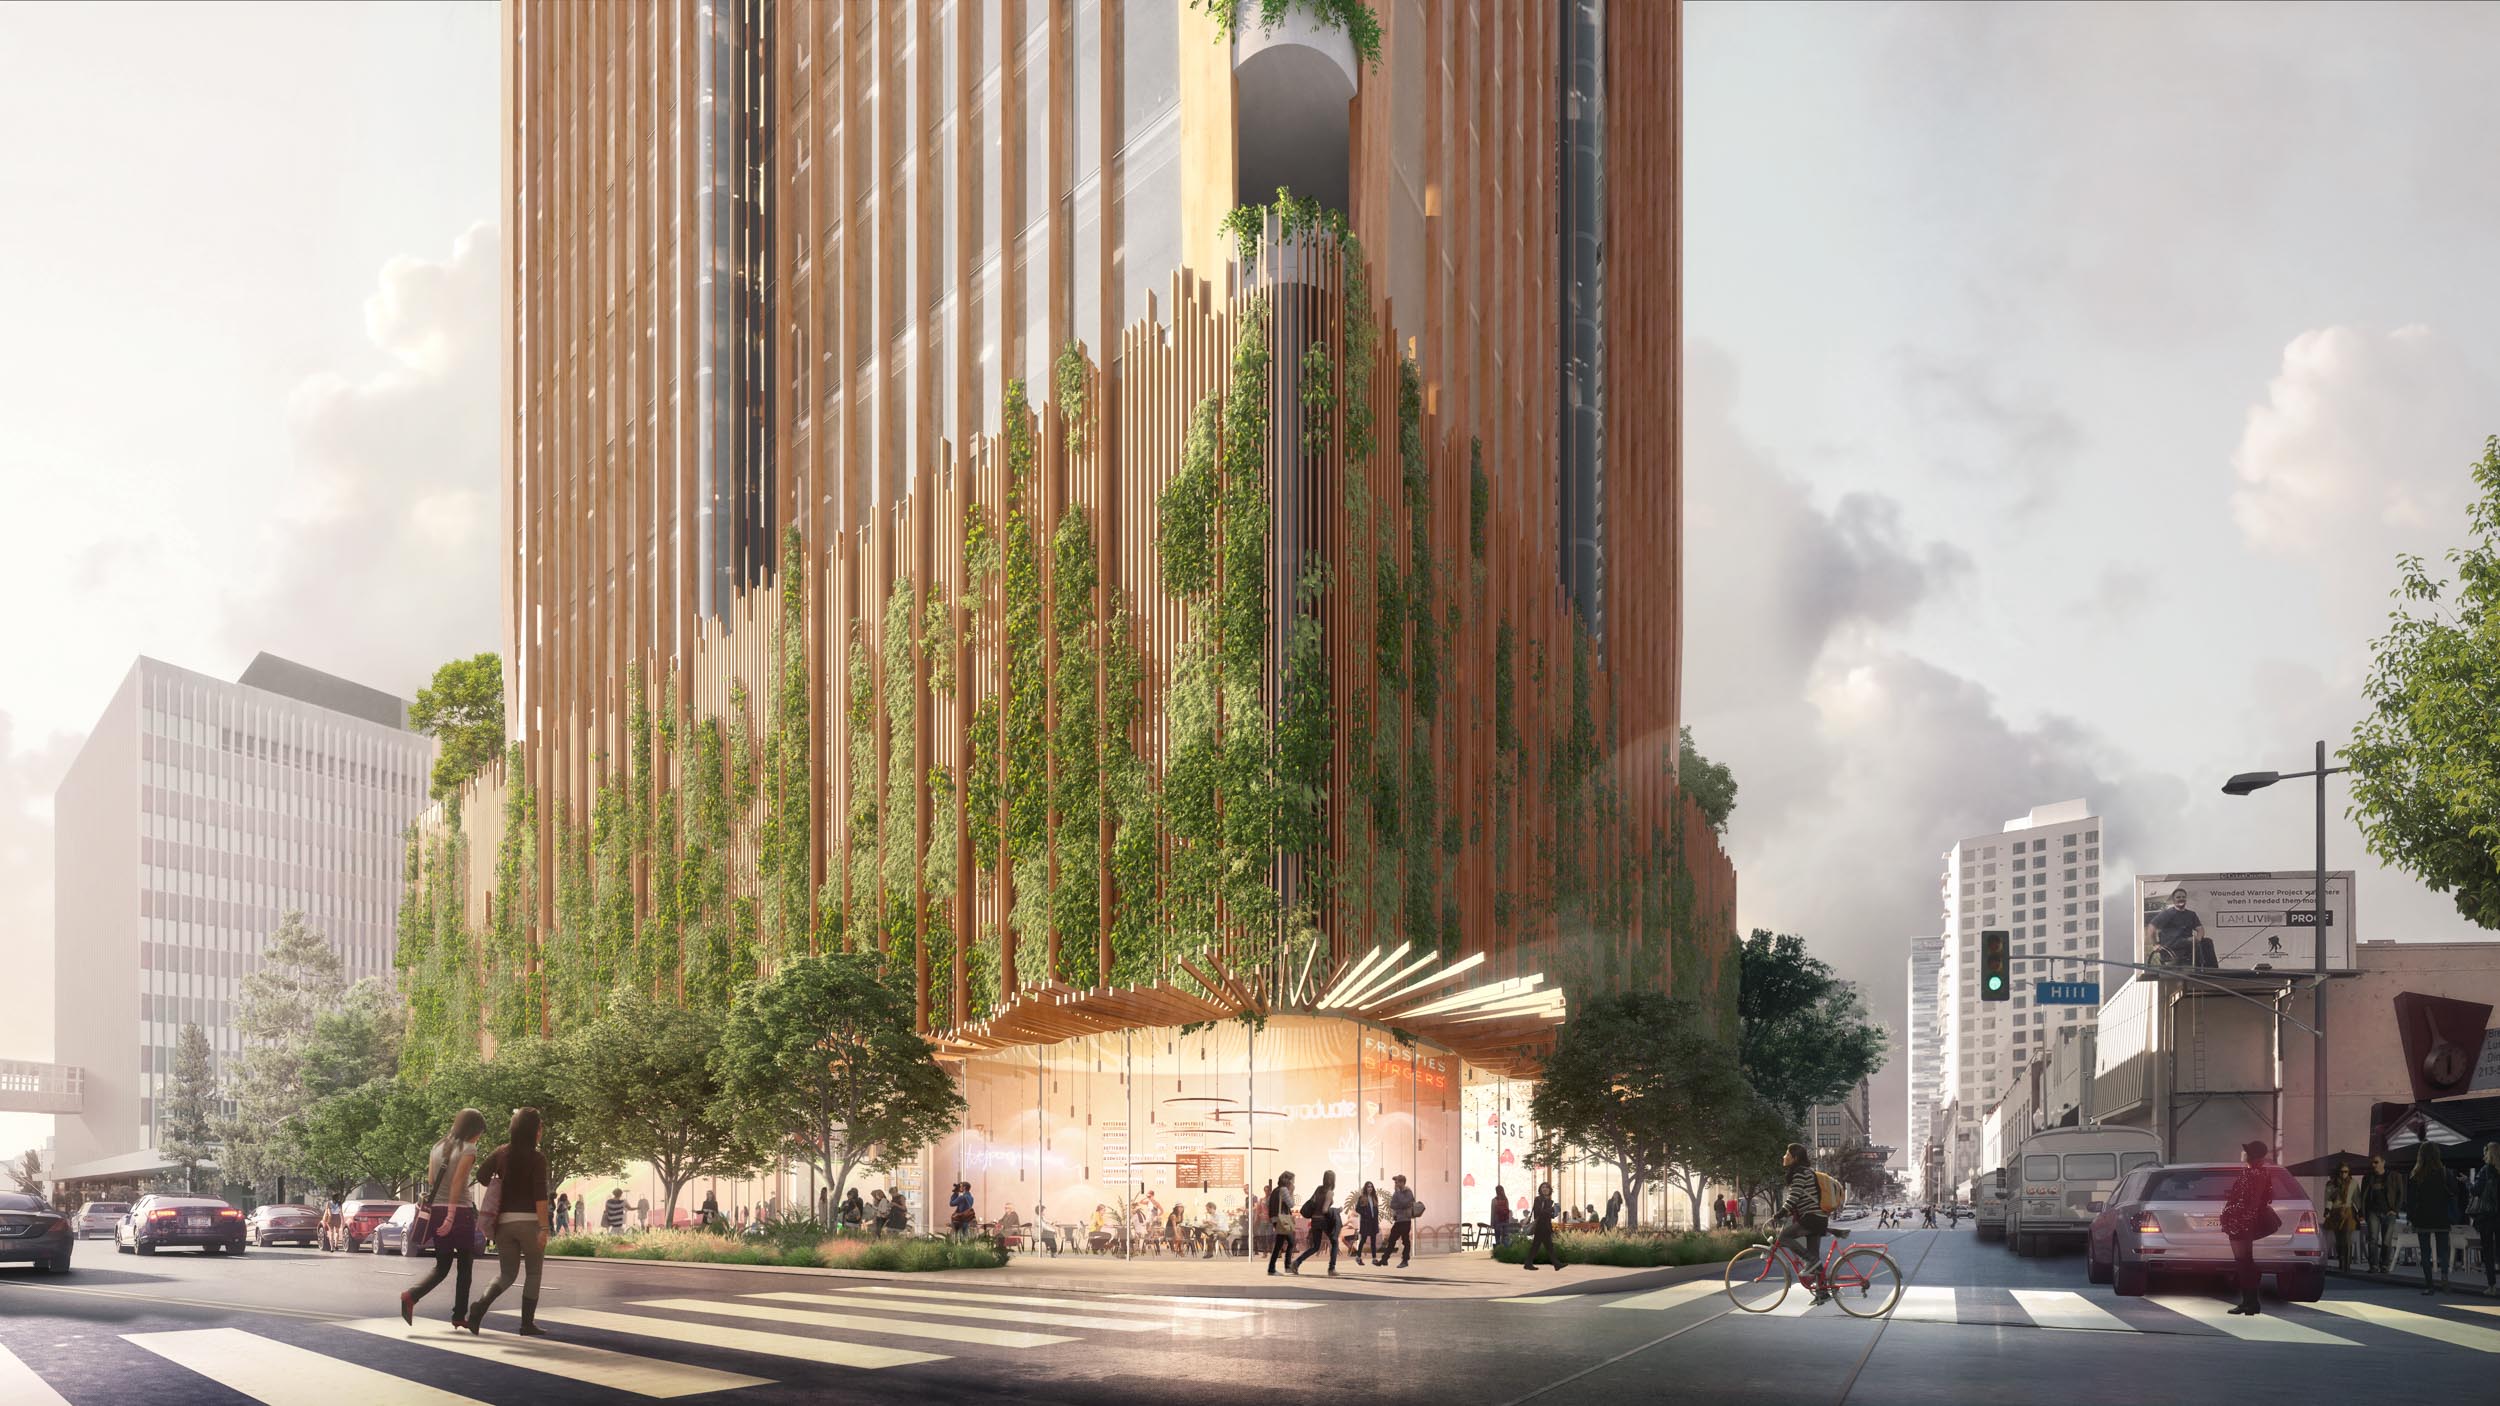 Street view rendering of the new residential tower Sky Trees with green facade